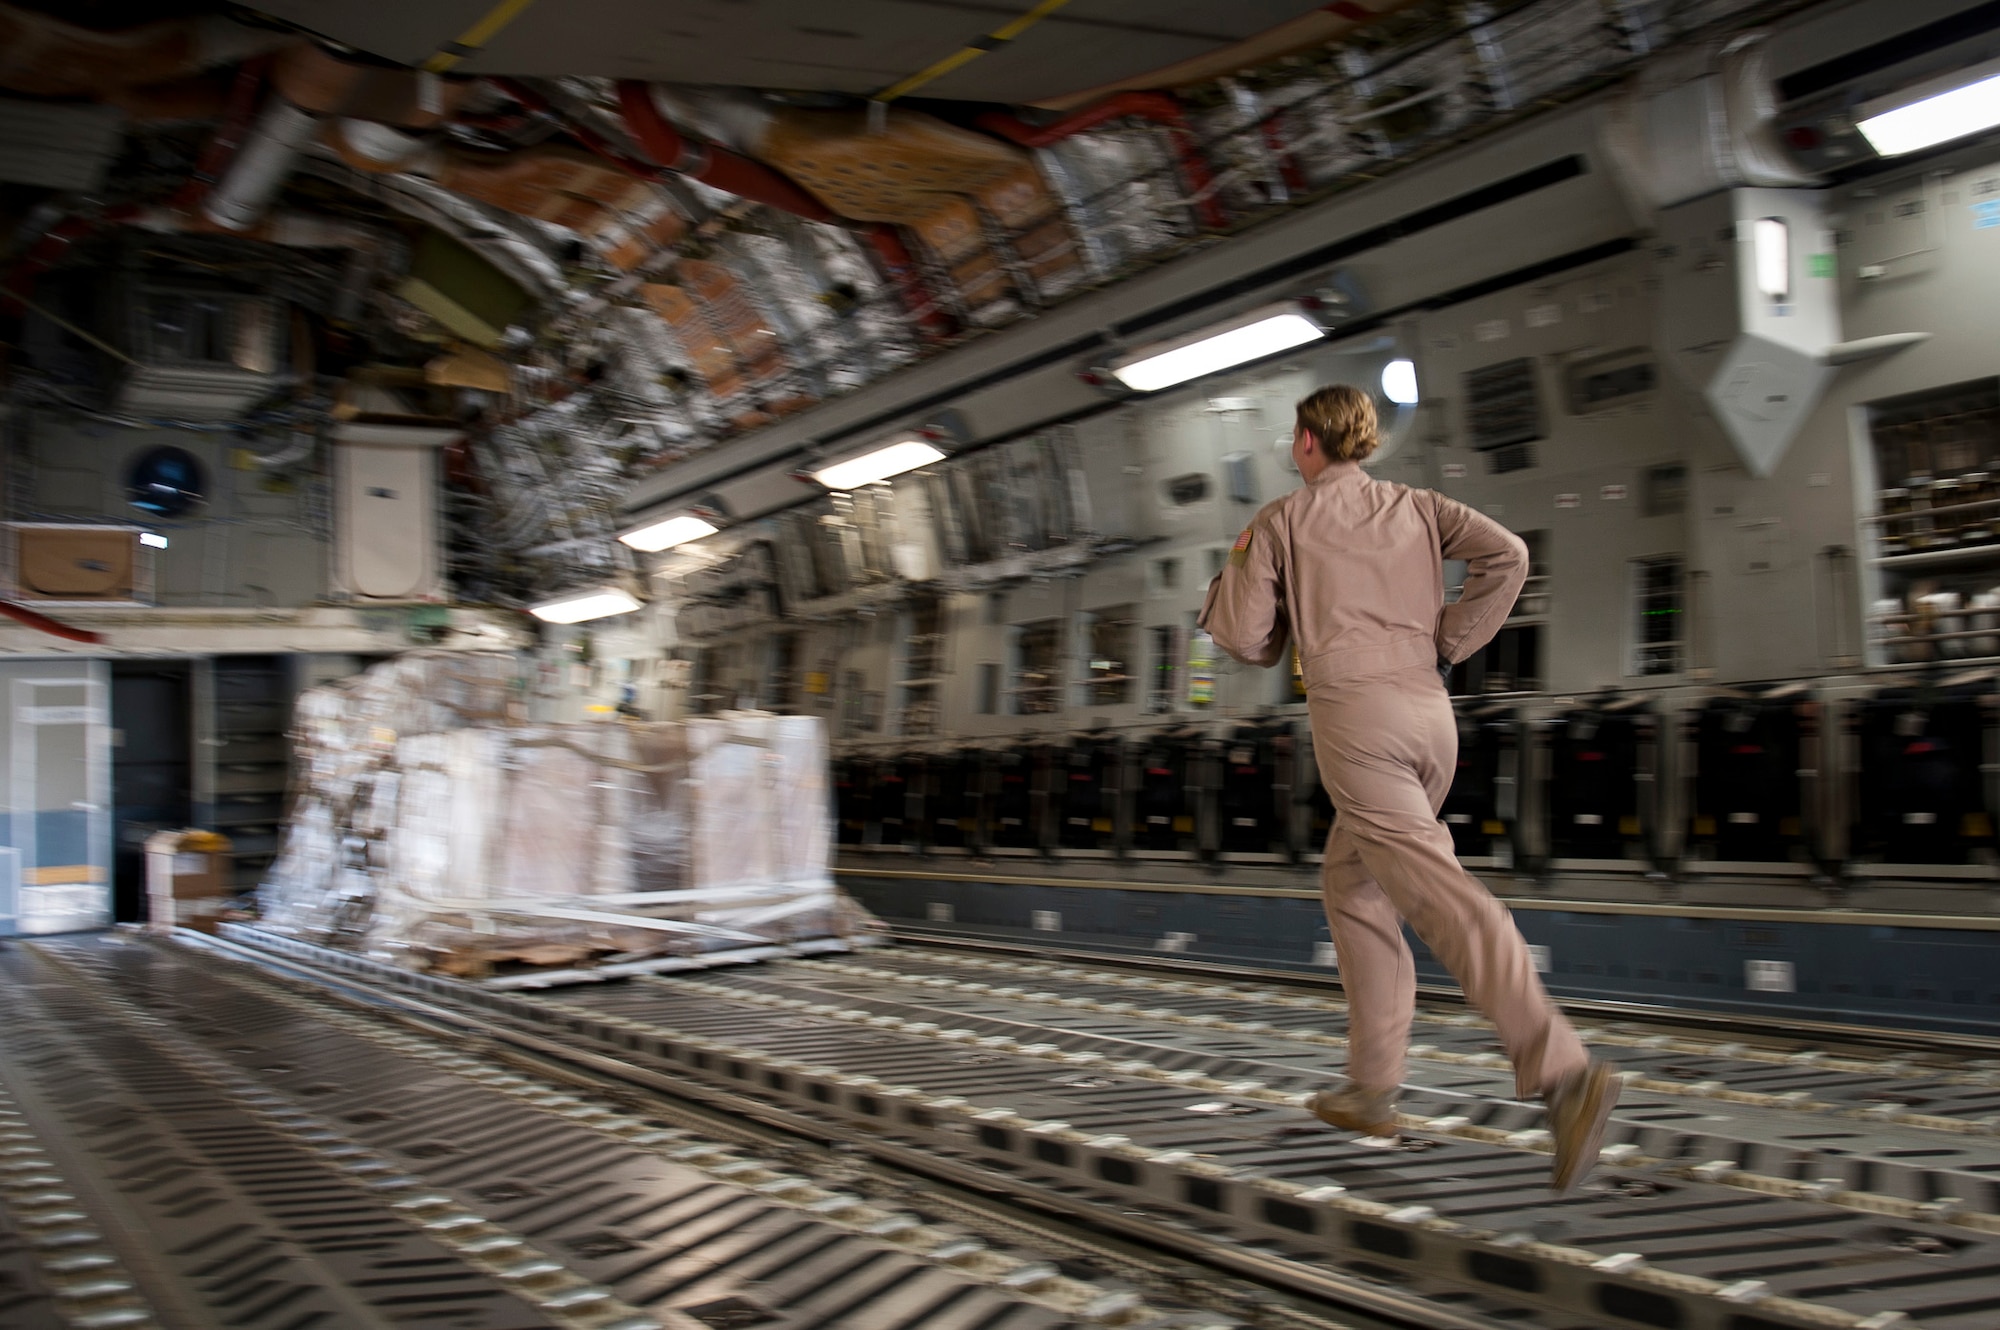 Staff Sgt. Melissa Butterfield, an 817th Expeditionary Airlift Squadron loadmaster, hurries to a pallet of cargo while unloading a C-17 Globemaster III aircraft Aug. 18, 2011, at Kandahar Air Field, Afghanistan, during a mission to transport equipment and supplies from Incirlik Air Base, Turkey. Loadmasters not only ensure the cargo is properly secured during flight, but also help with the unloading. (U.S. Air Force photo by Tech. Sgt. Michael B. Keller/Released)